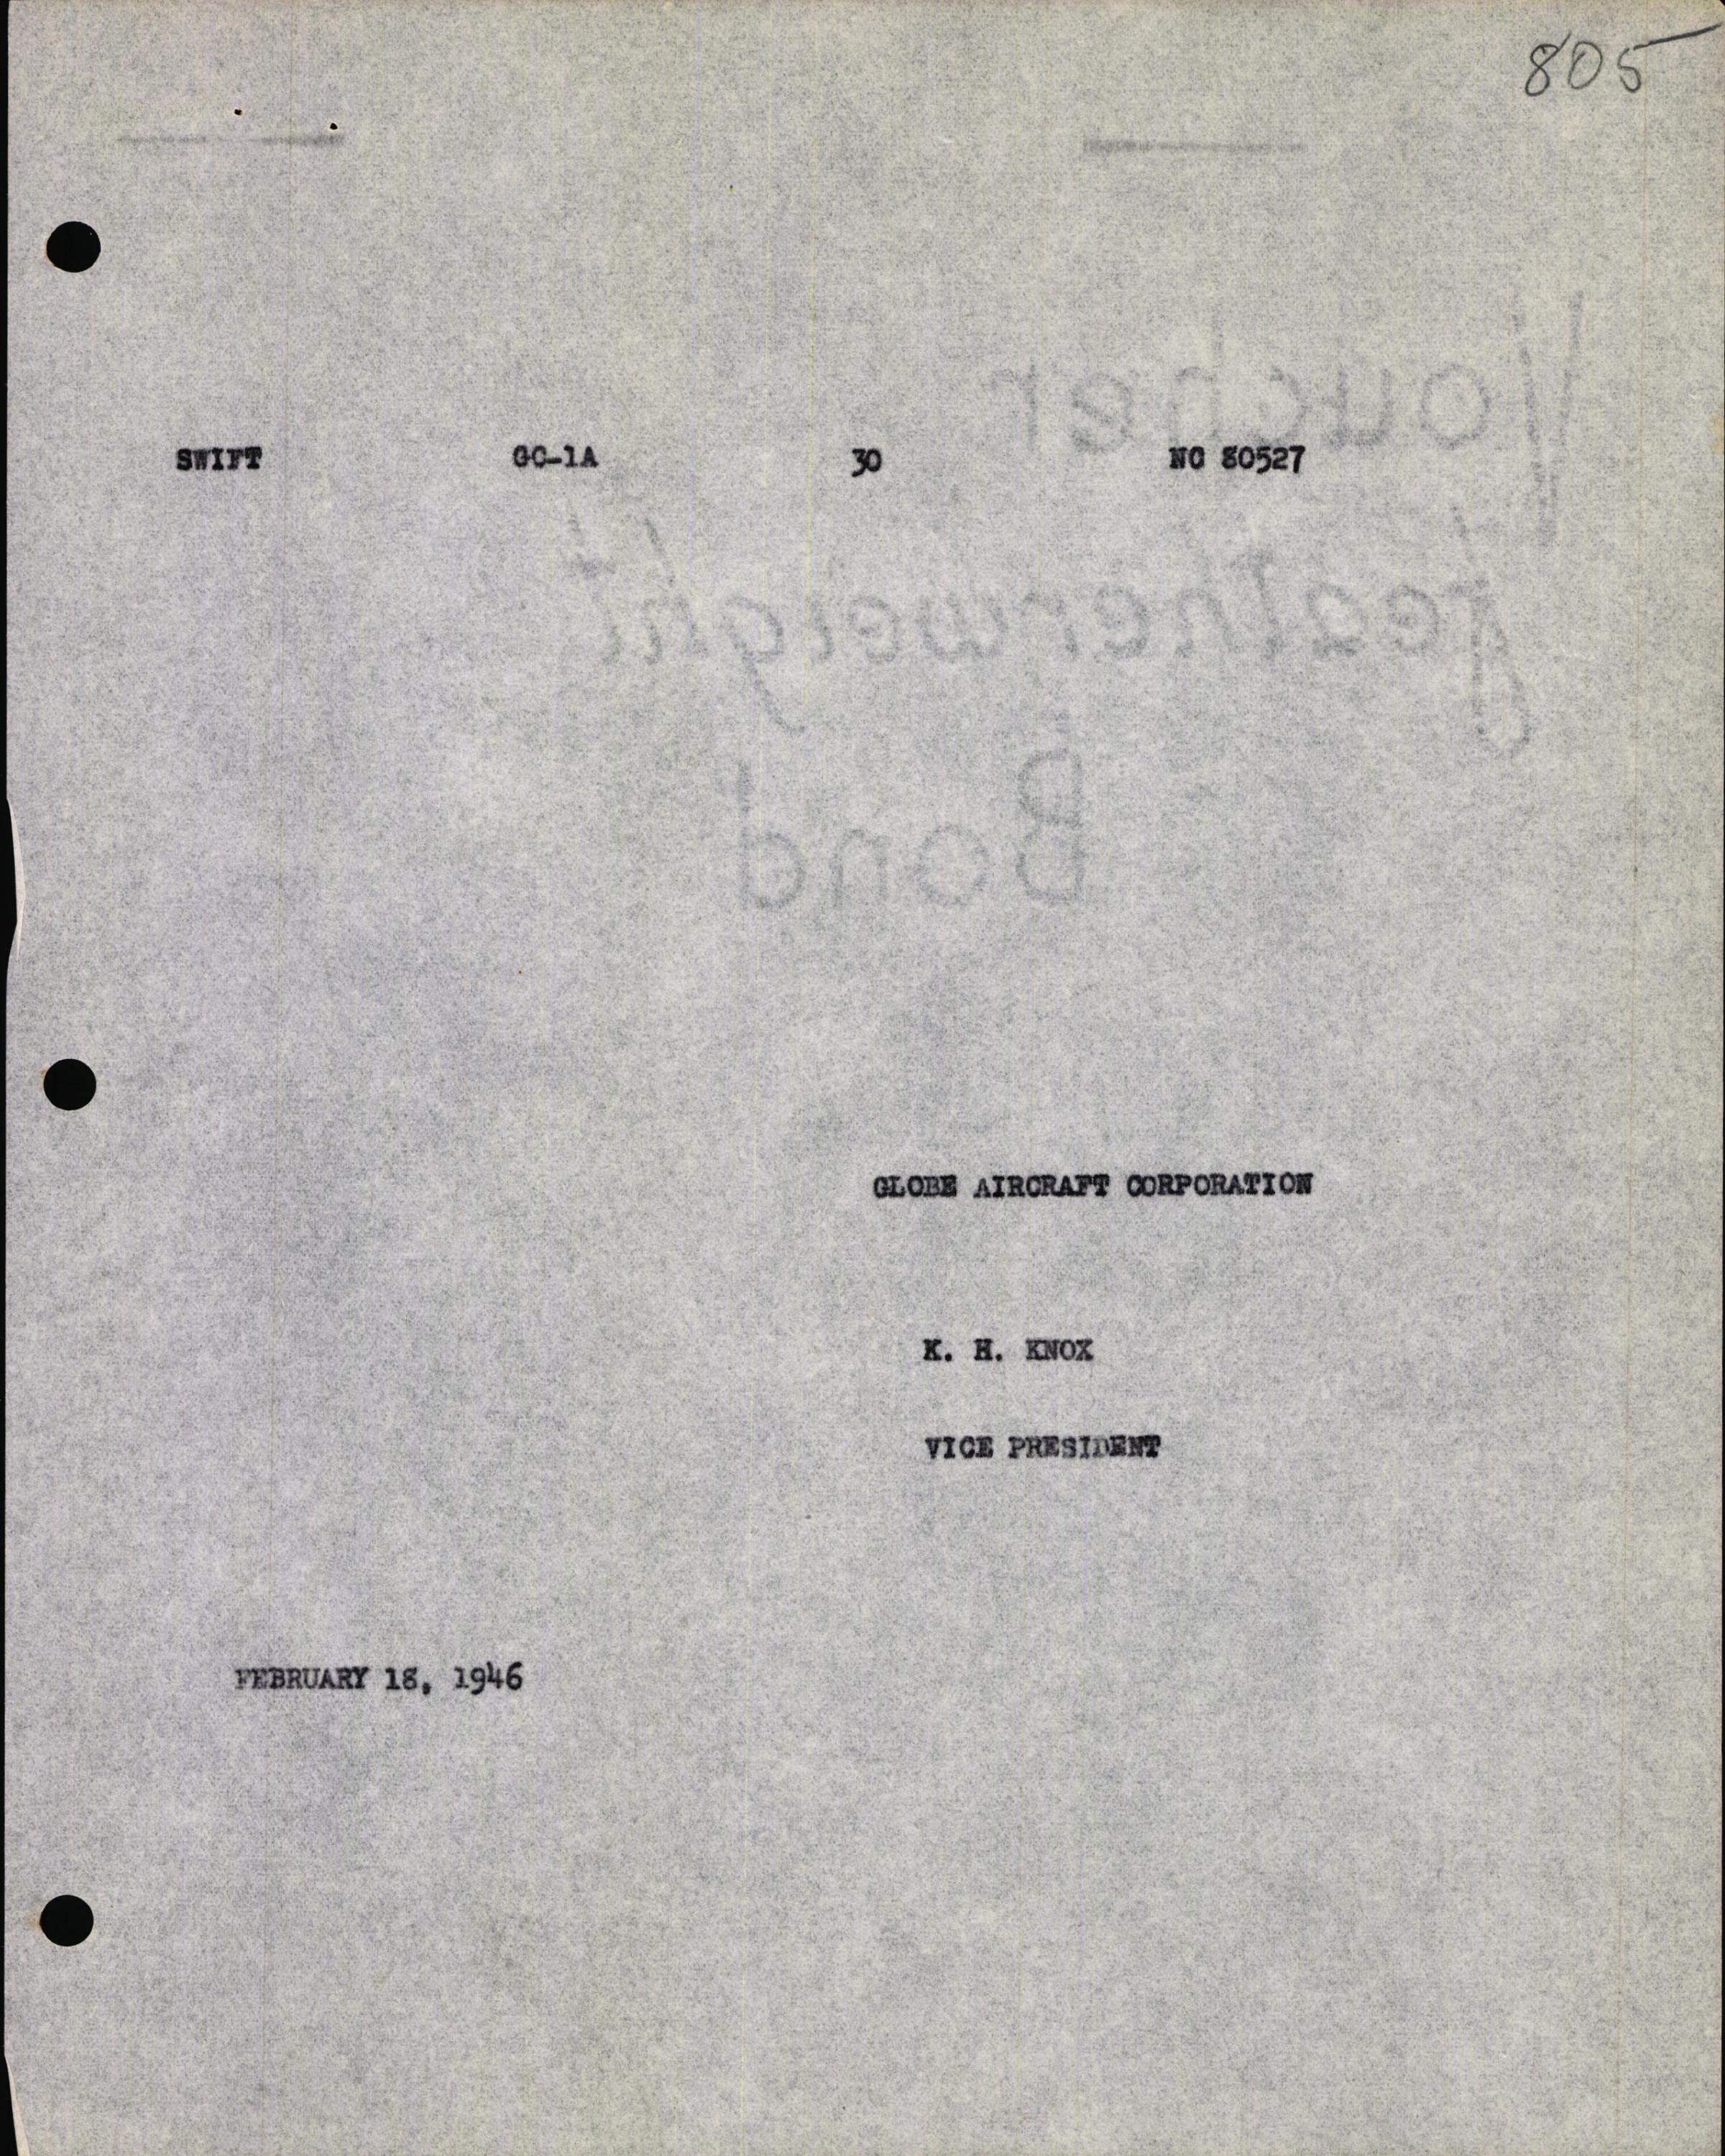 Sample page 5 from AirCorps Library document: Technical Information for Serial Number 30